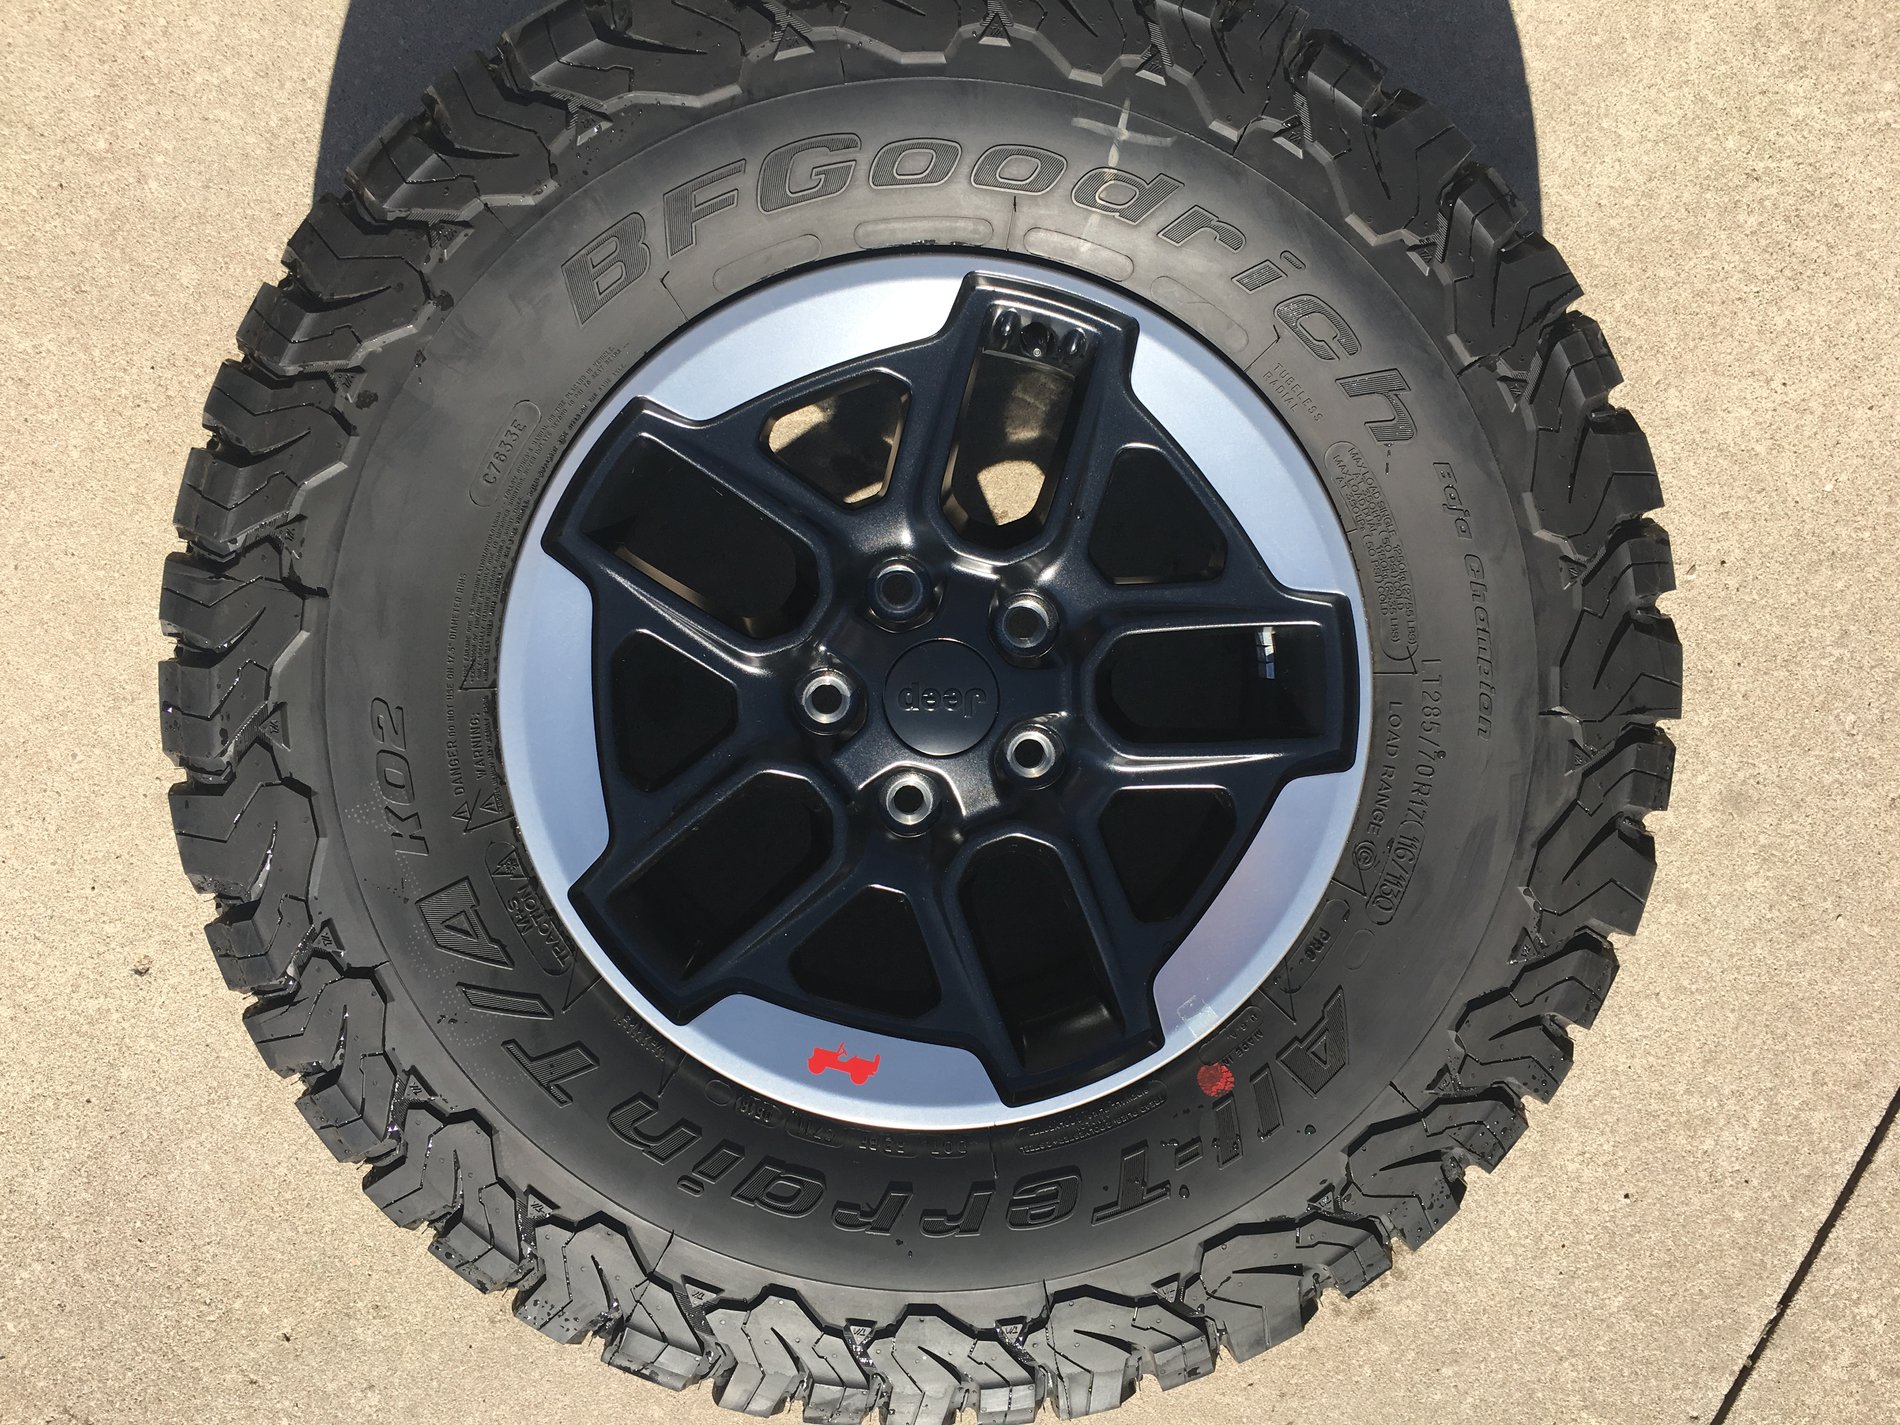 Sold Jl Rubicon Upgraded Wheelstires Wi New Price 2018 Jeep